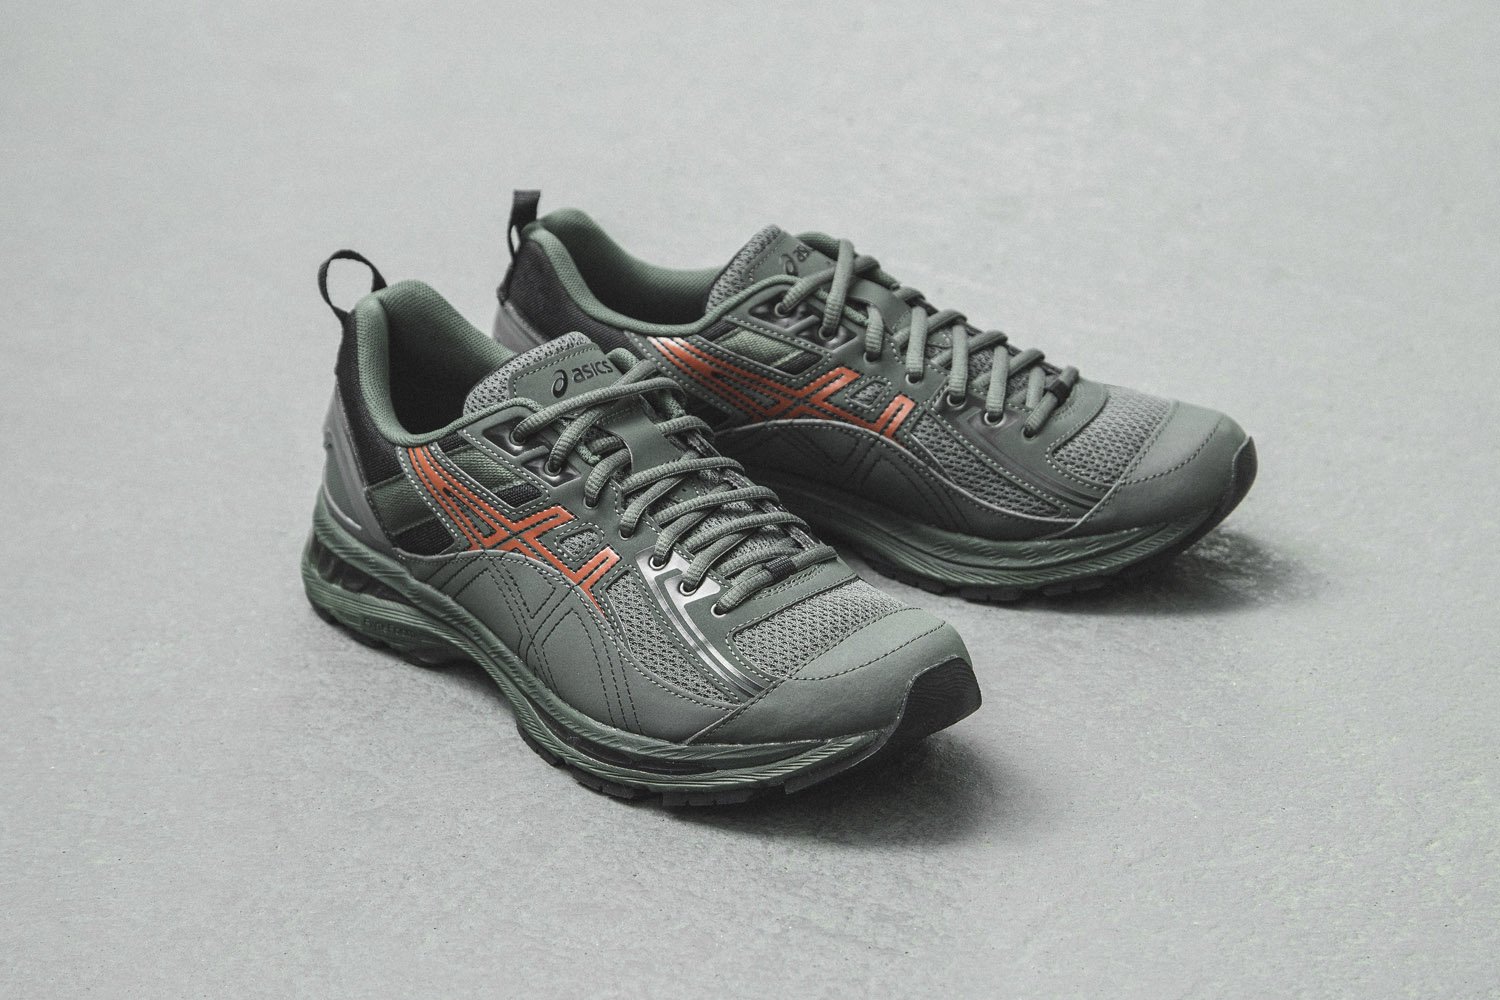 HBX on X: "Special Release: Kiko Kostadinov links up with ASICS​ to create  a new take on the GEL-BURZ silhouette. The GEL-BURZ 2 is available in three  colorways, titled “Terracotta," “Seafoam” and “